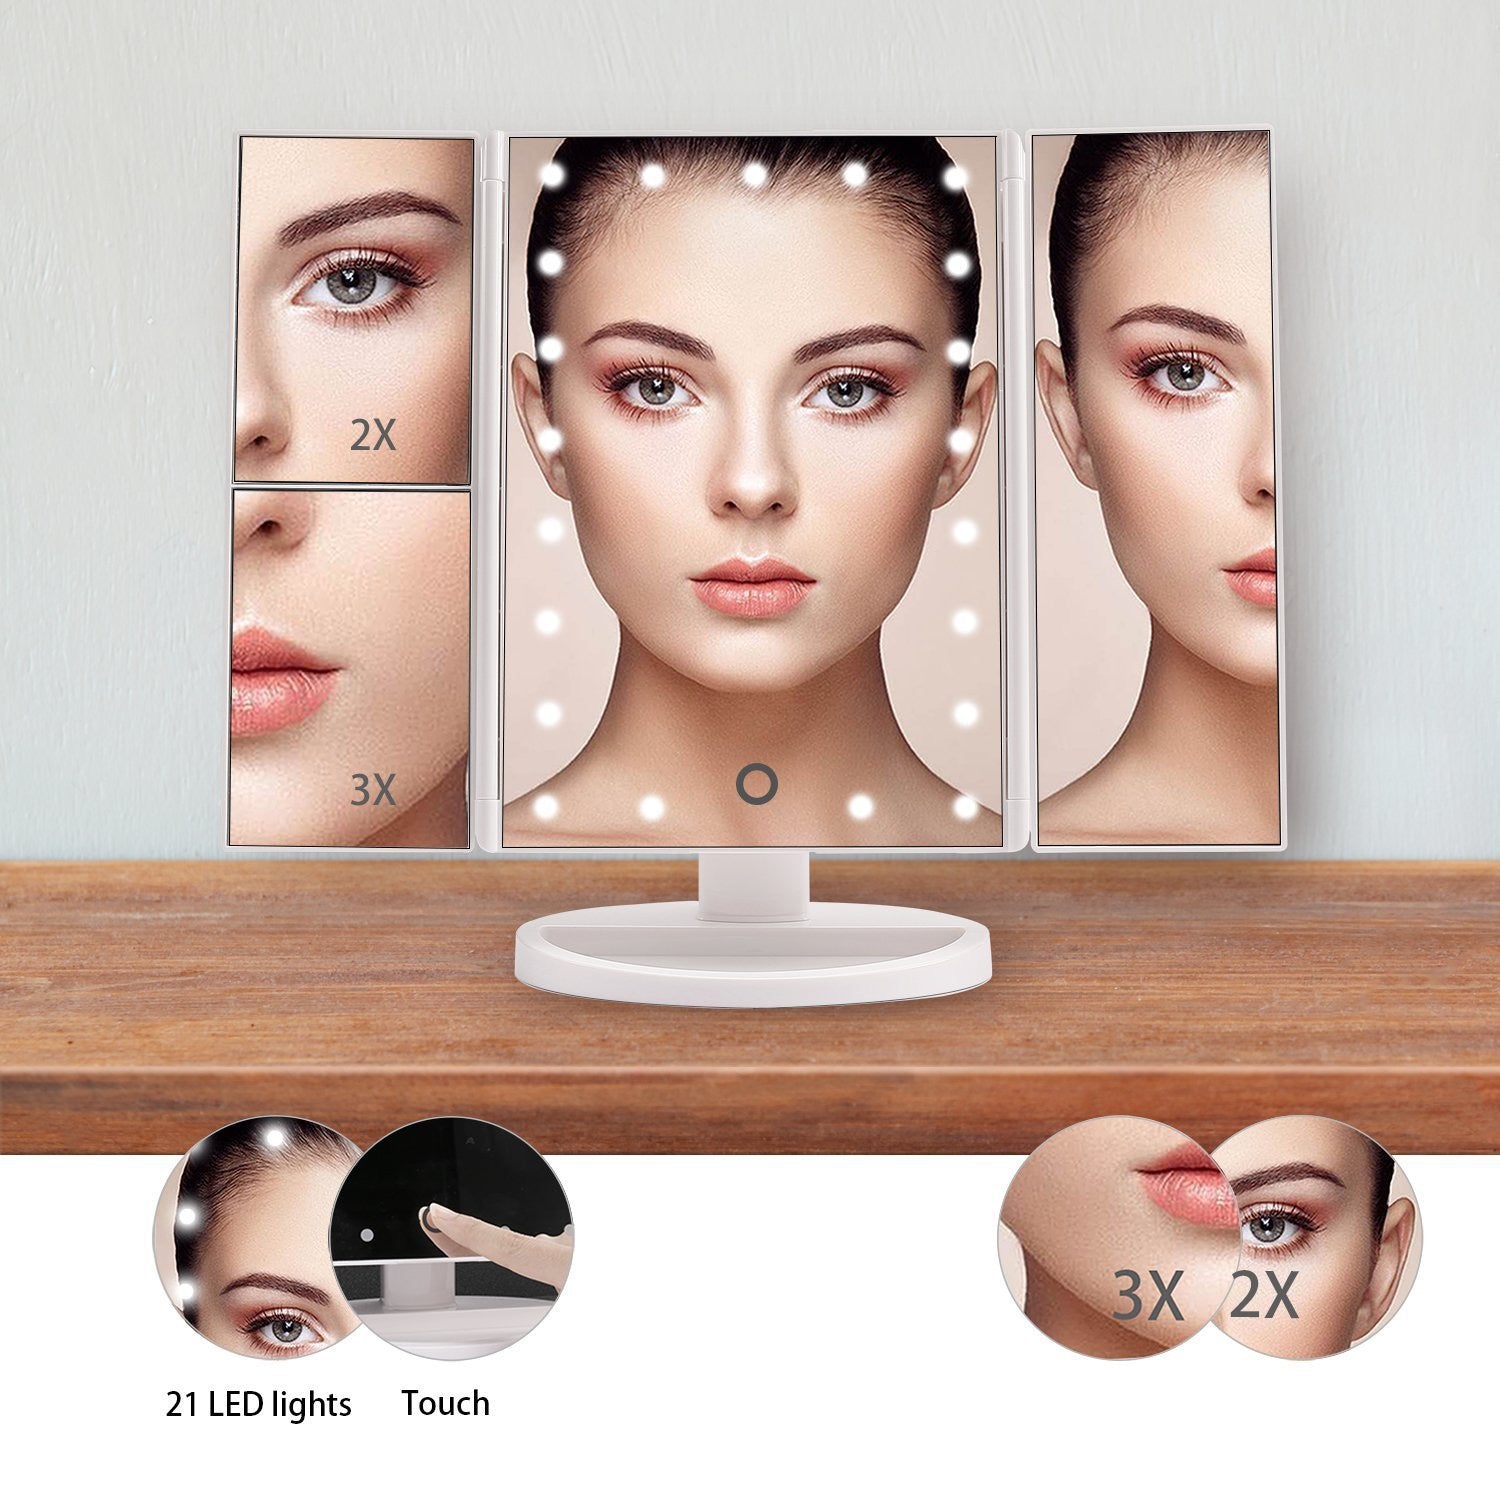 A woman's face reflected in a Tri-fold Makeup Mirror with LED Lights, which is placed on a desk